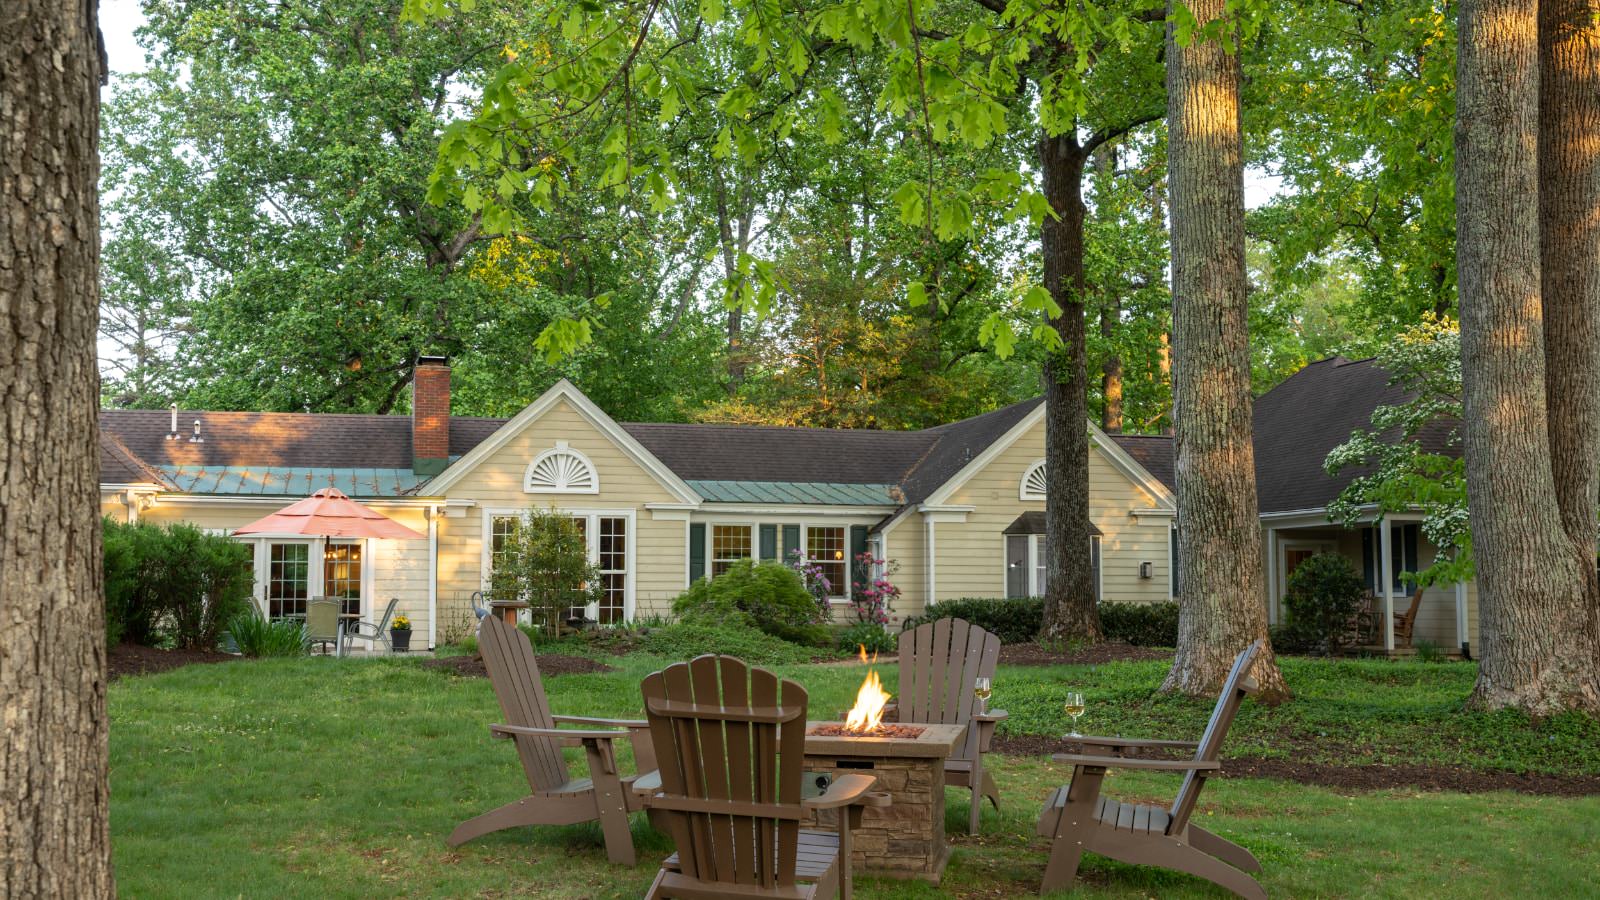 Exterior view of property painted yellow with white trim and firepit with four brown Adirondack chairs surrounded by green grass and very tall green trees